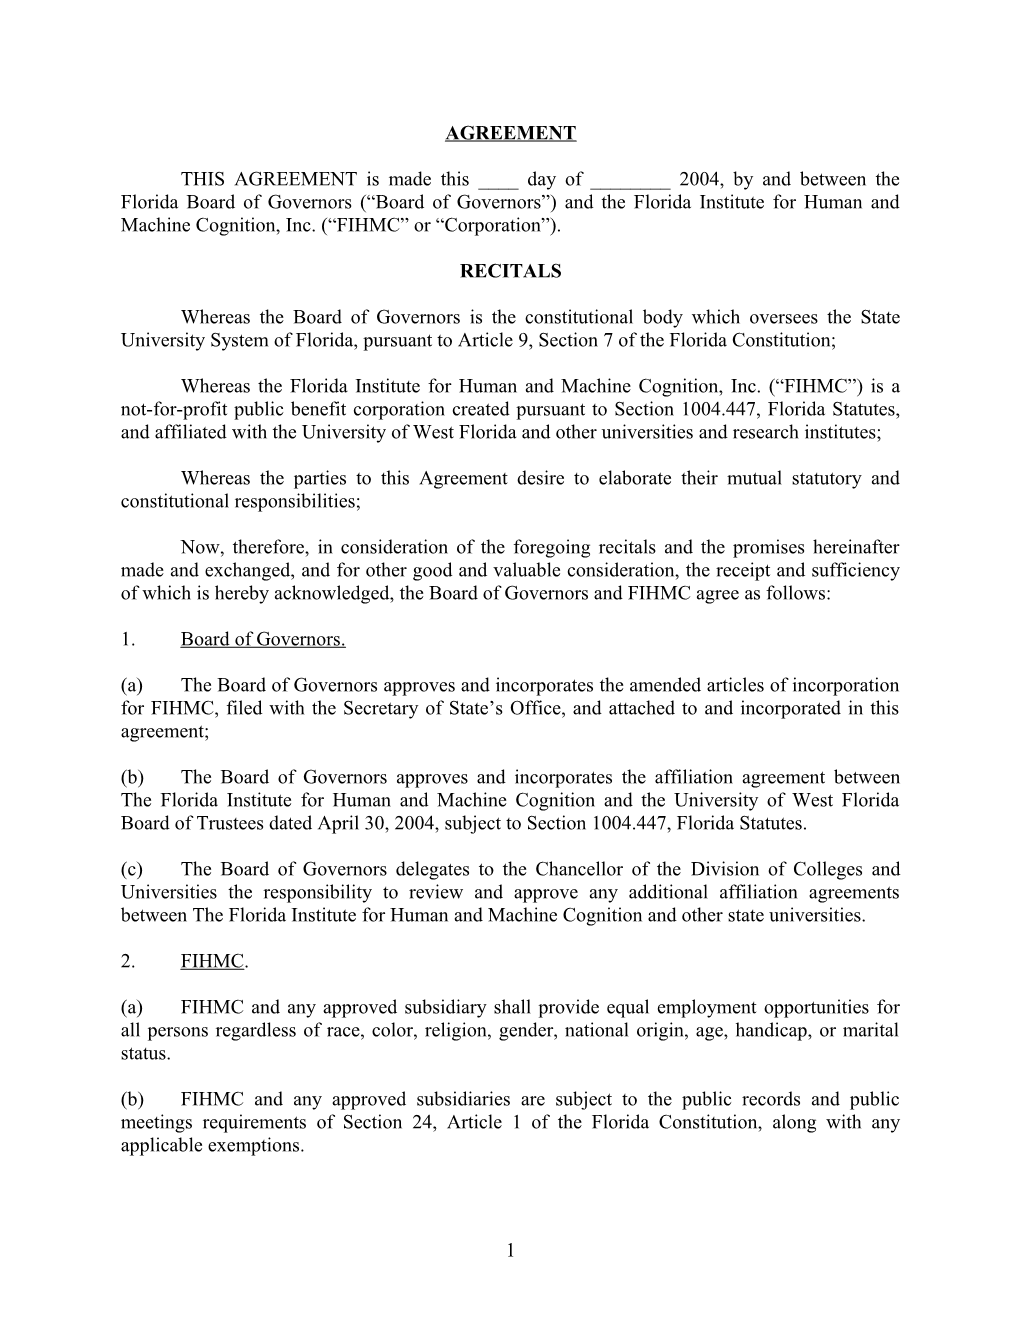 Agreement Between the Florida Board of Governors